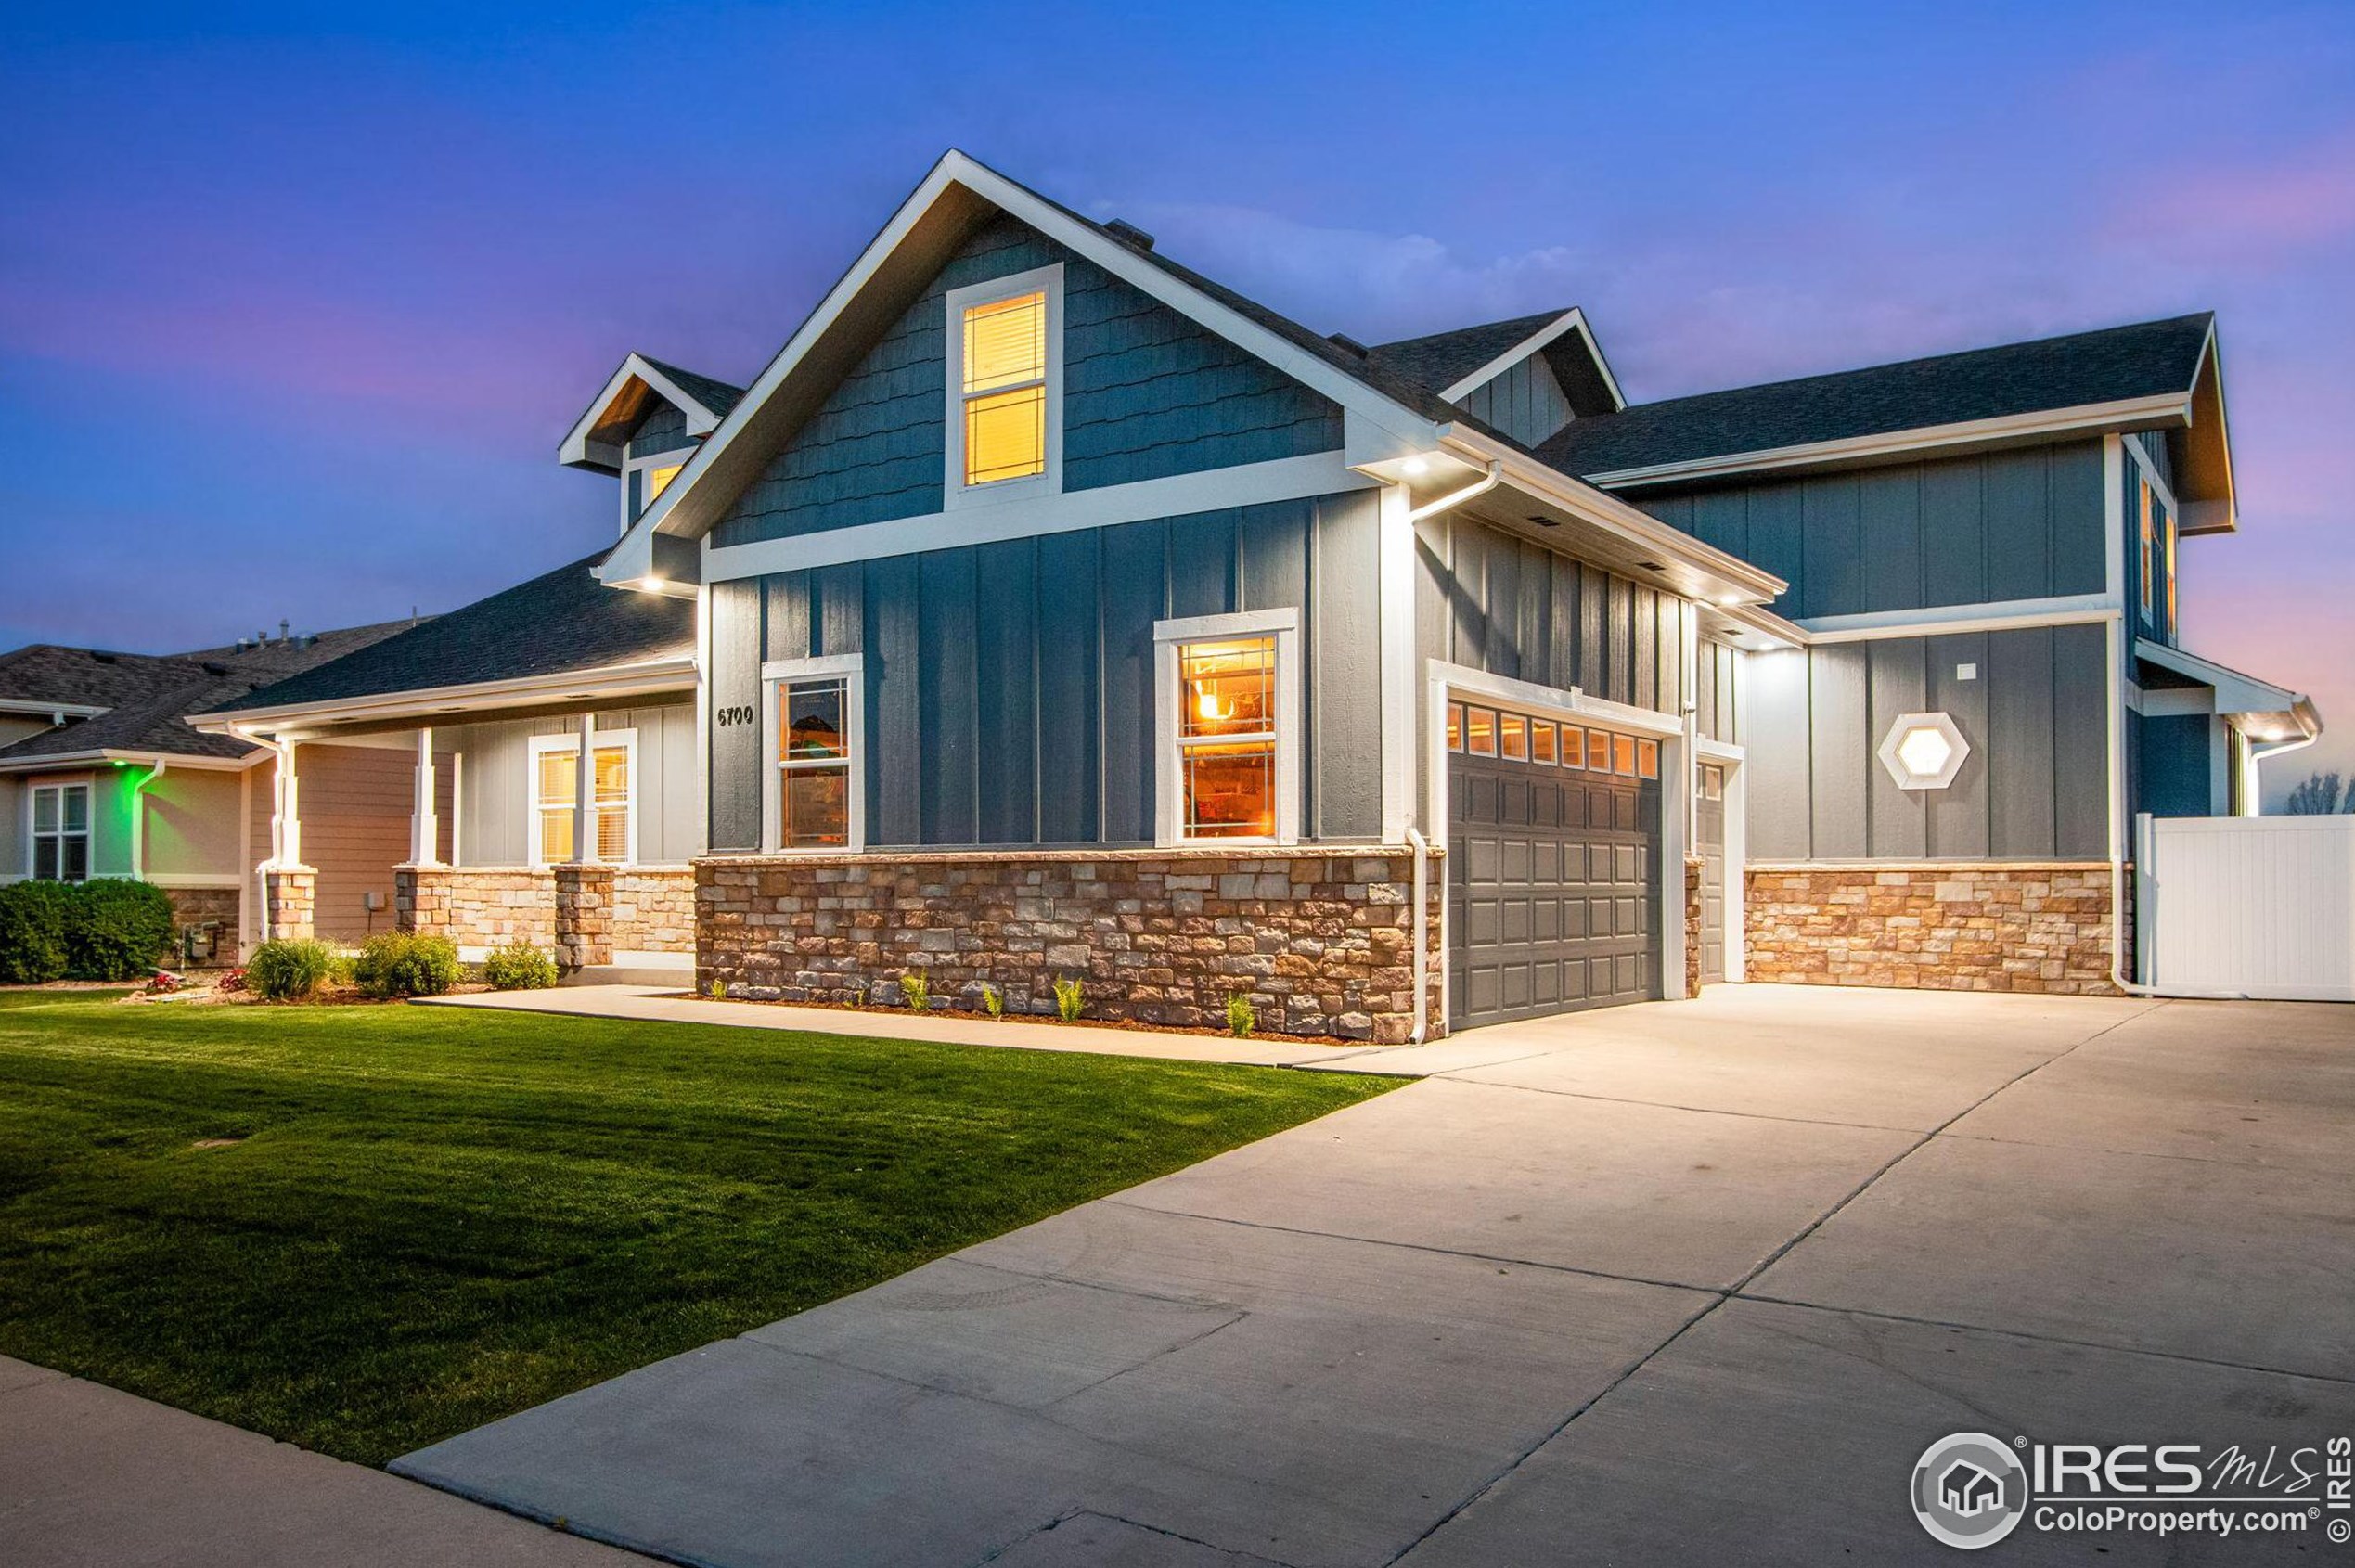 6700 34th Street Rd, Greeley, CO 80634